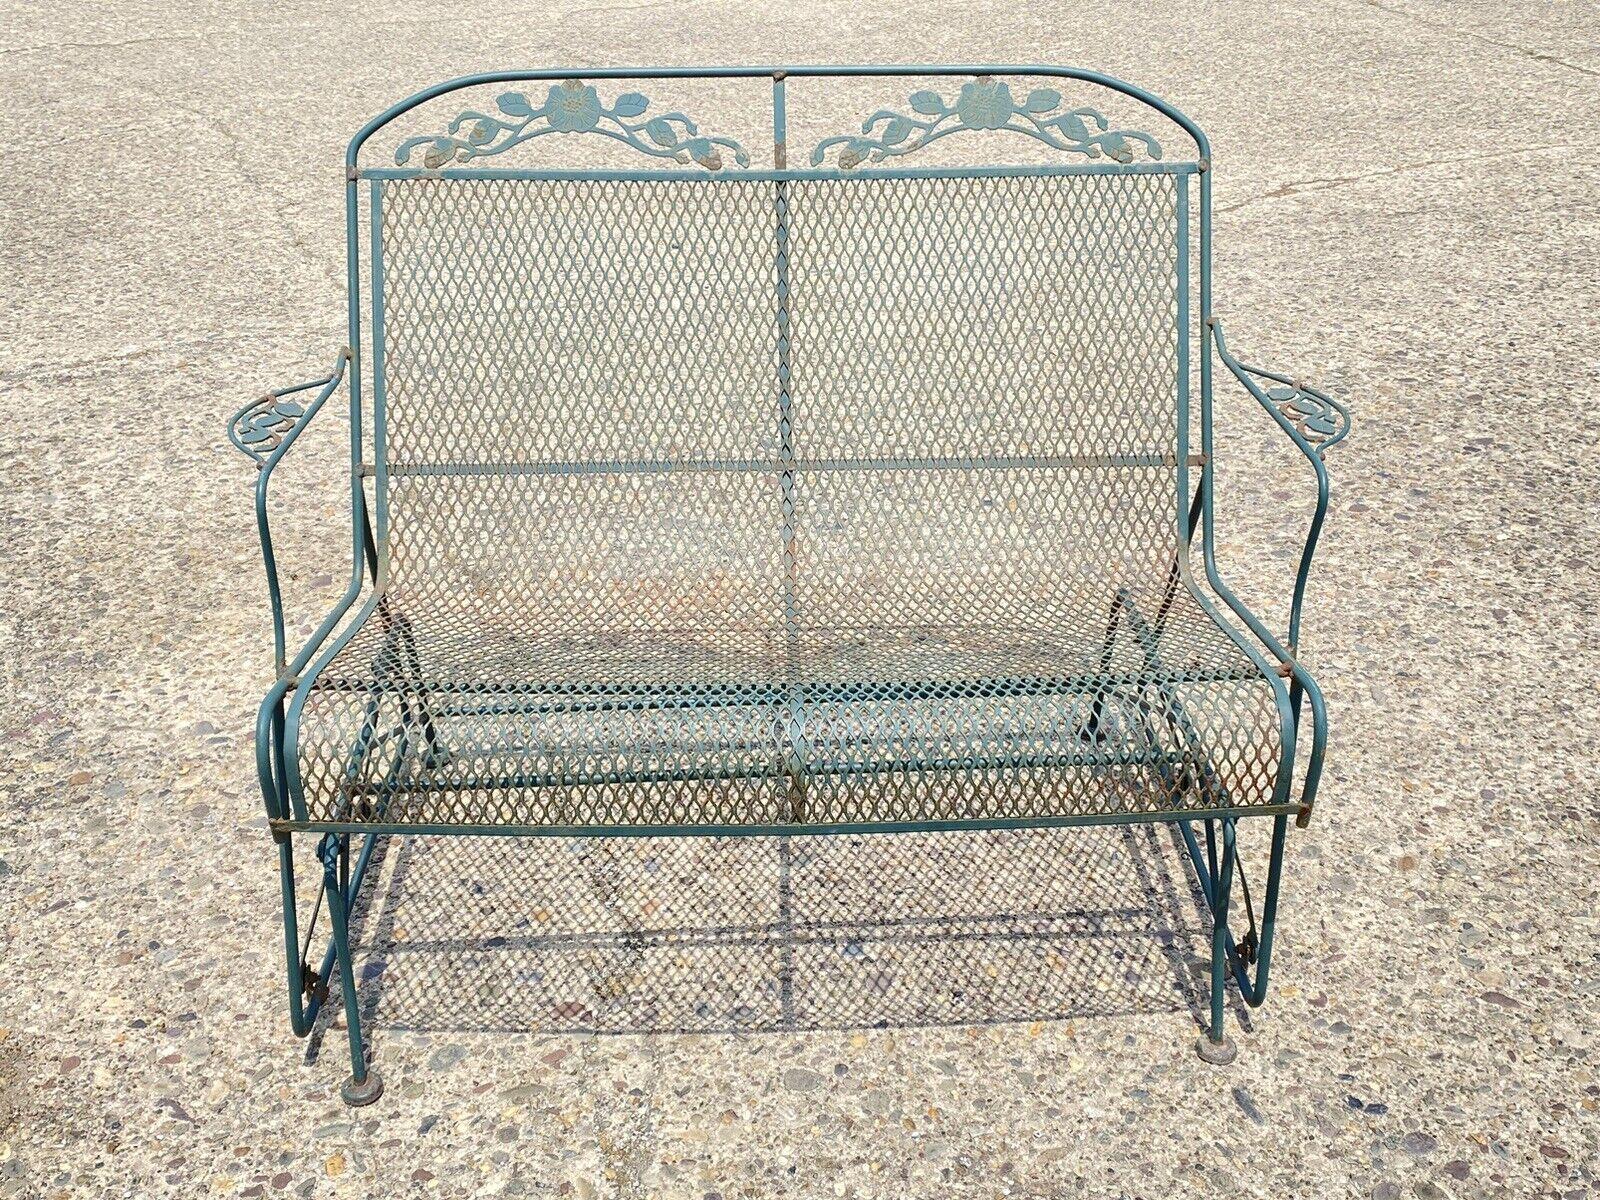 Vintage Meadowcraft Dogwood Green Wrought Iron Garden Patio Glider Loveseat. circa mid to late 20th century. Measurements: 35.5